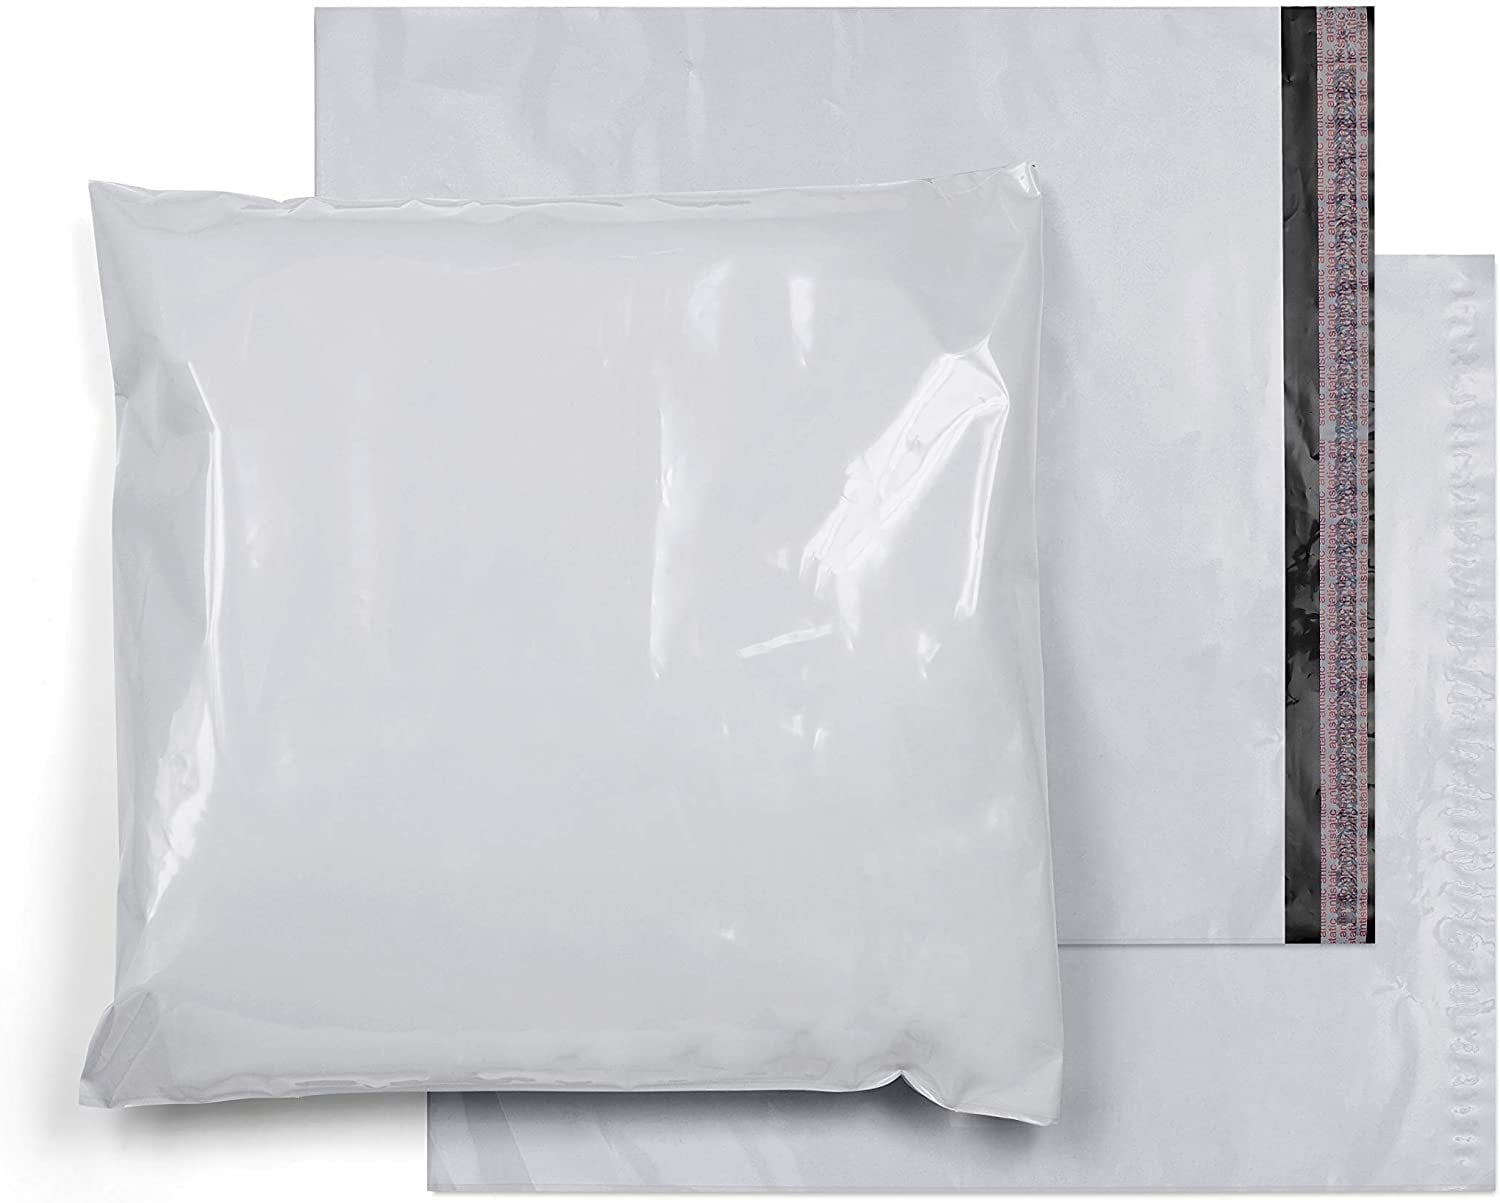 Secure Seal by Shipping Depot 50 Pack of 24x24 White Poly Mailers Self Sealing Envelope Plastic Bags 24”x24” #9 